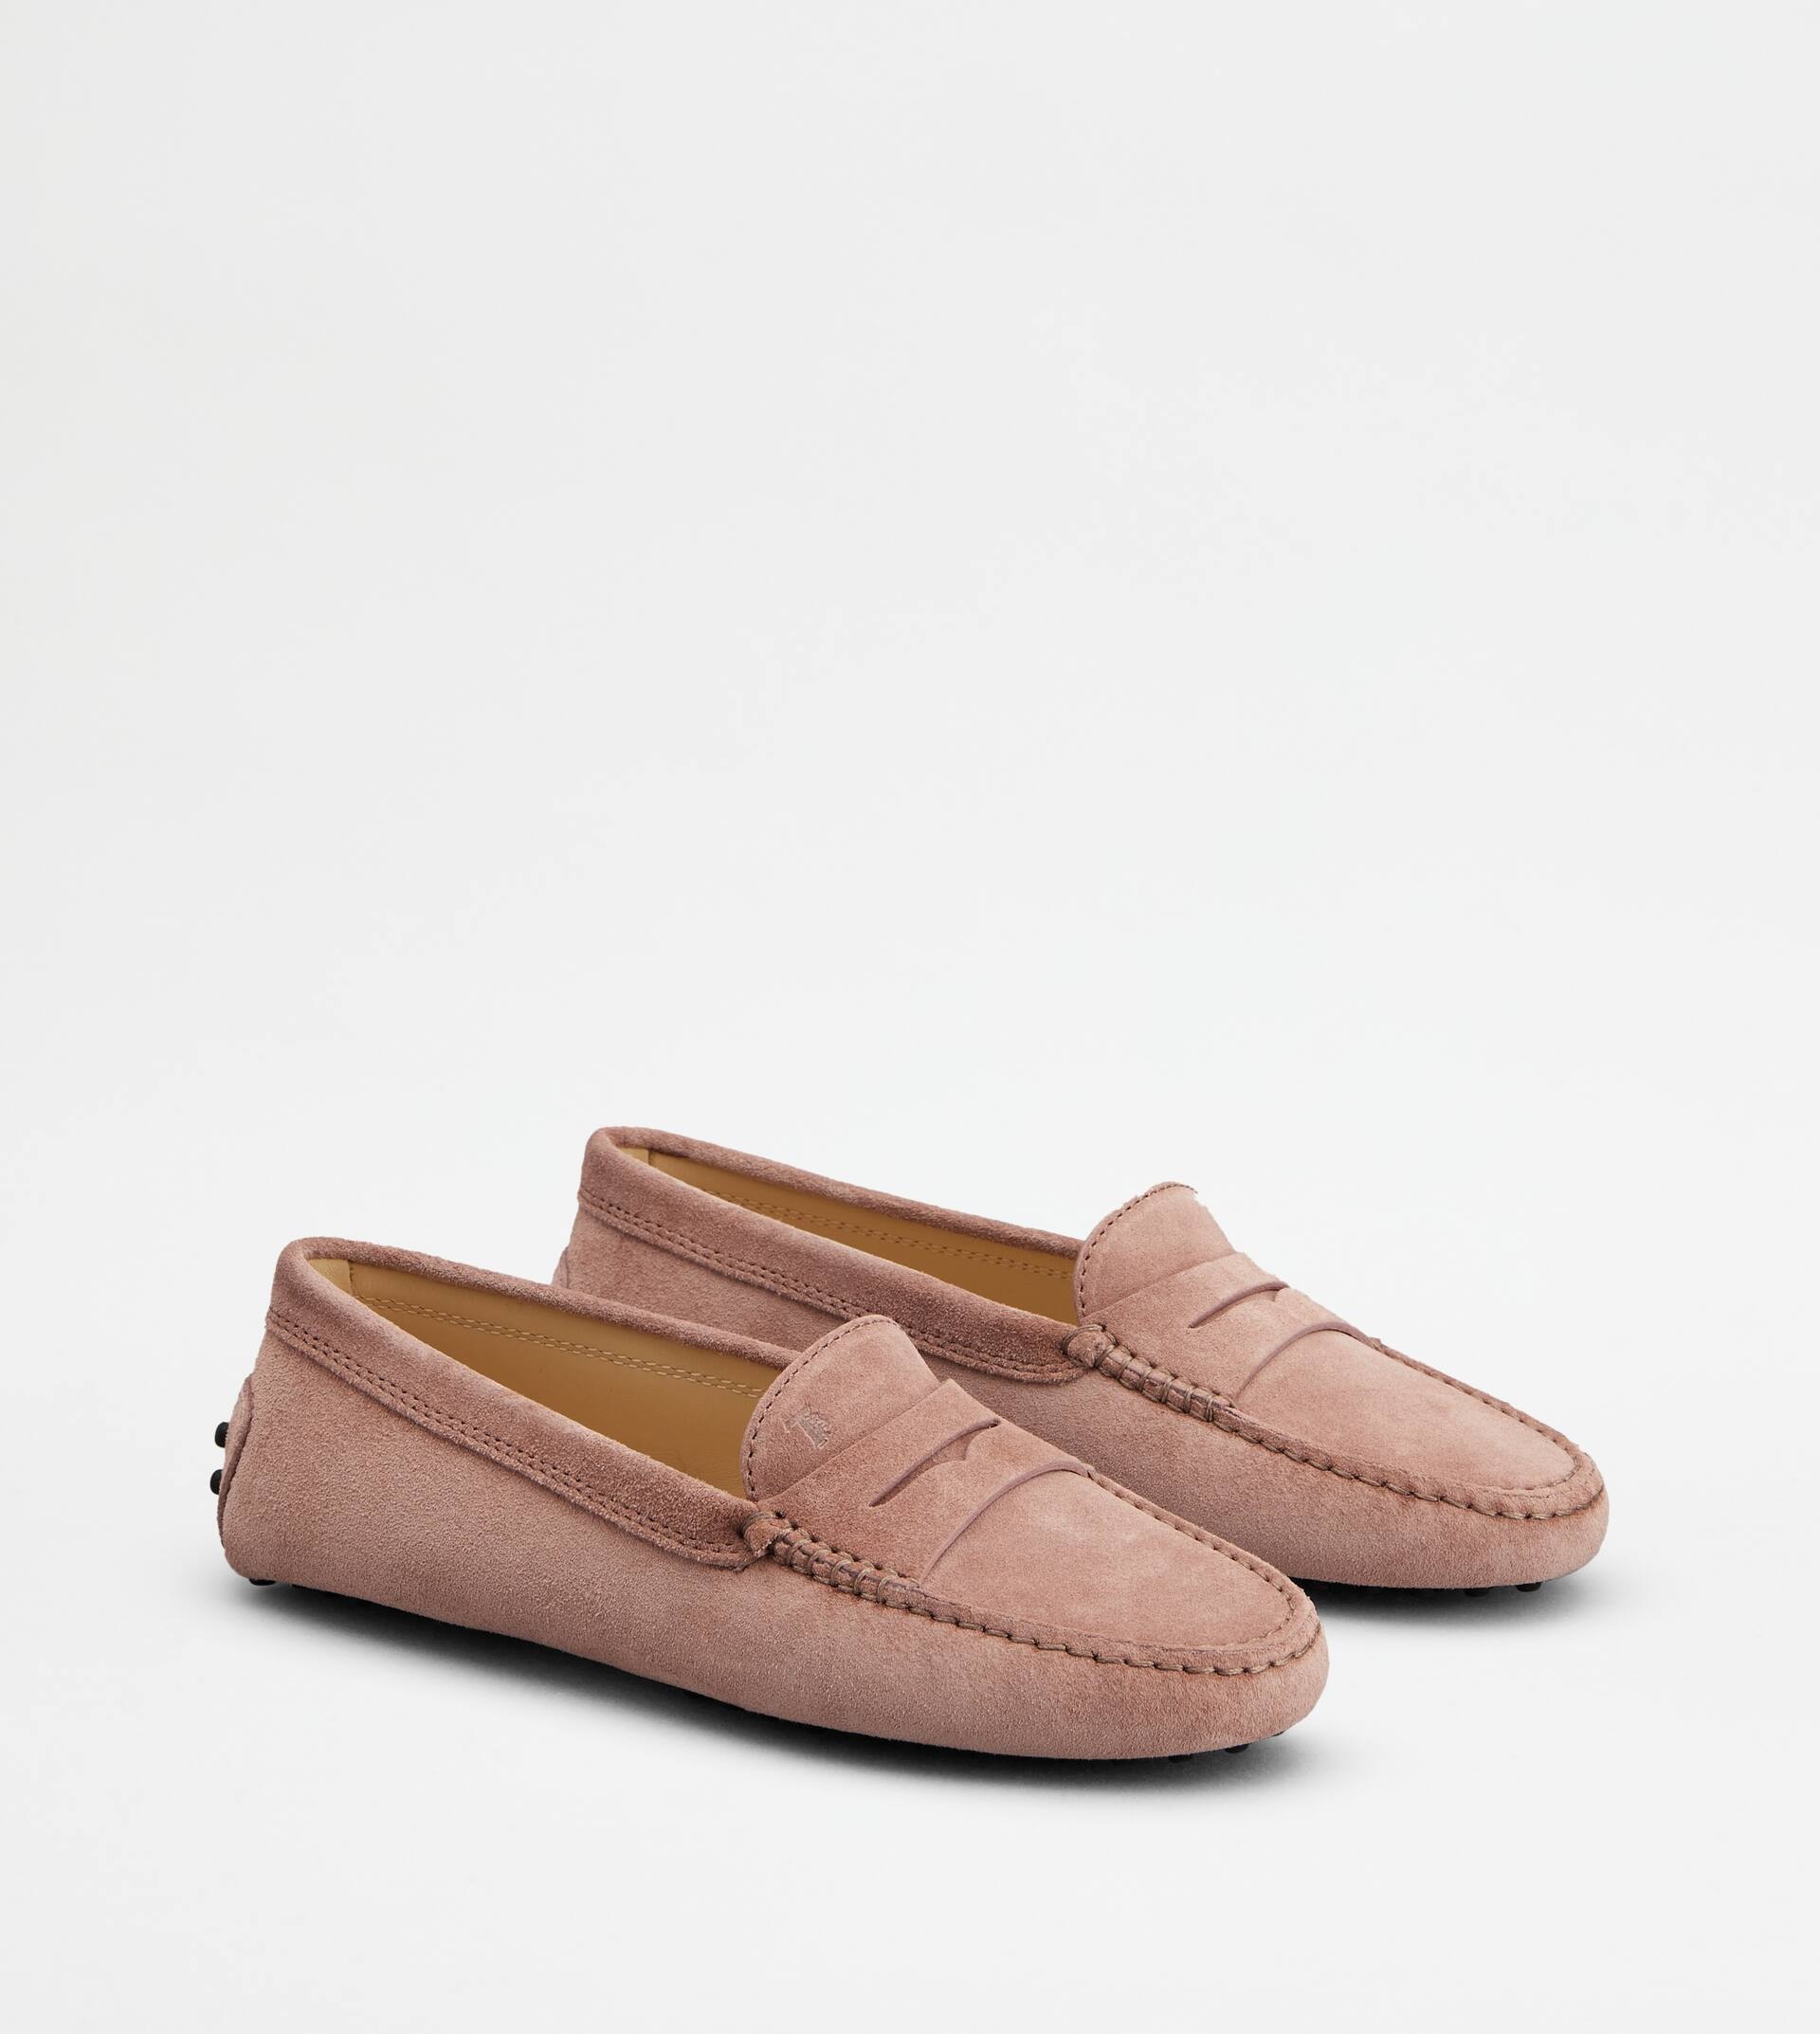 GOMMINO DRIVING SHOES IN SUEDE - PINK - 3